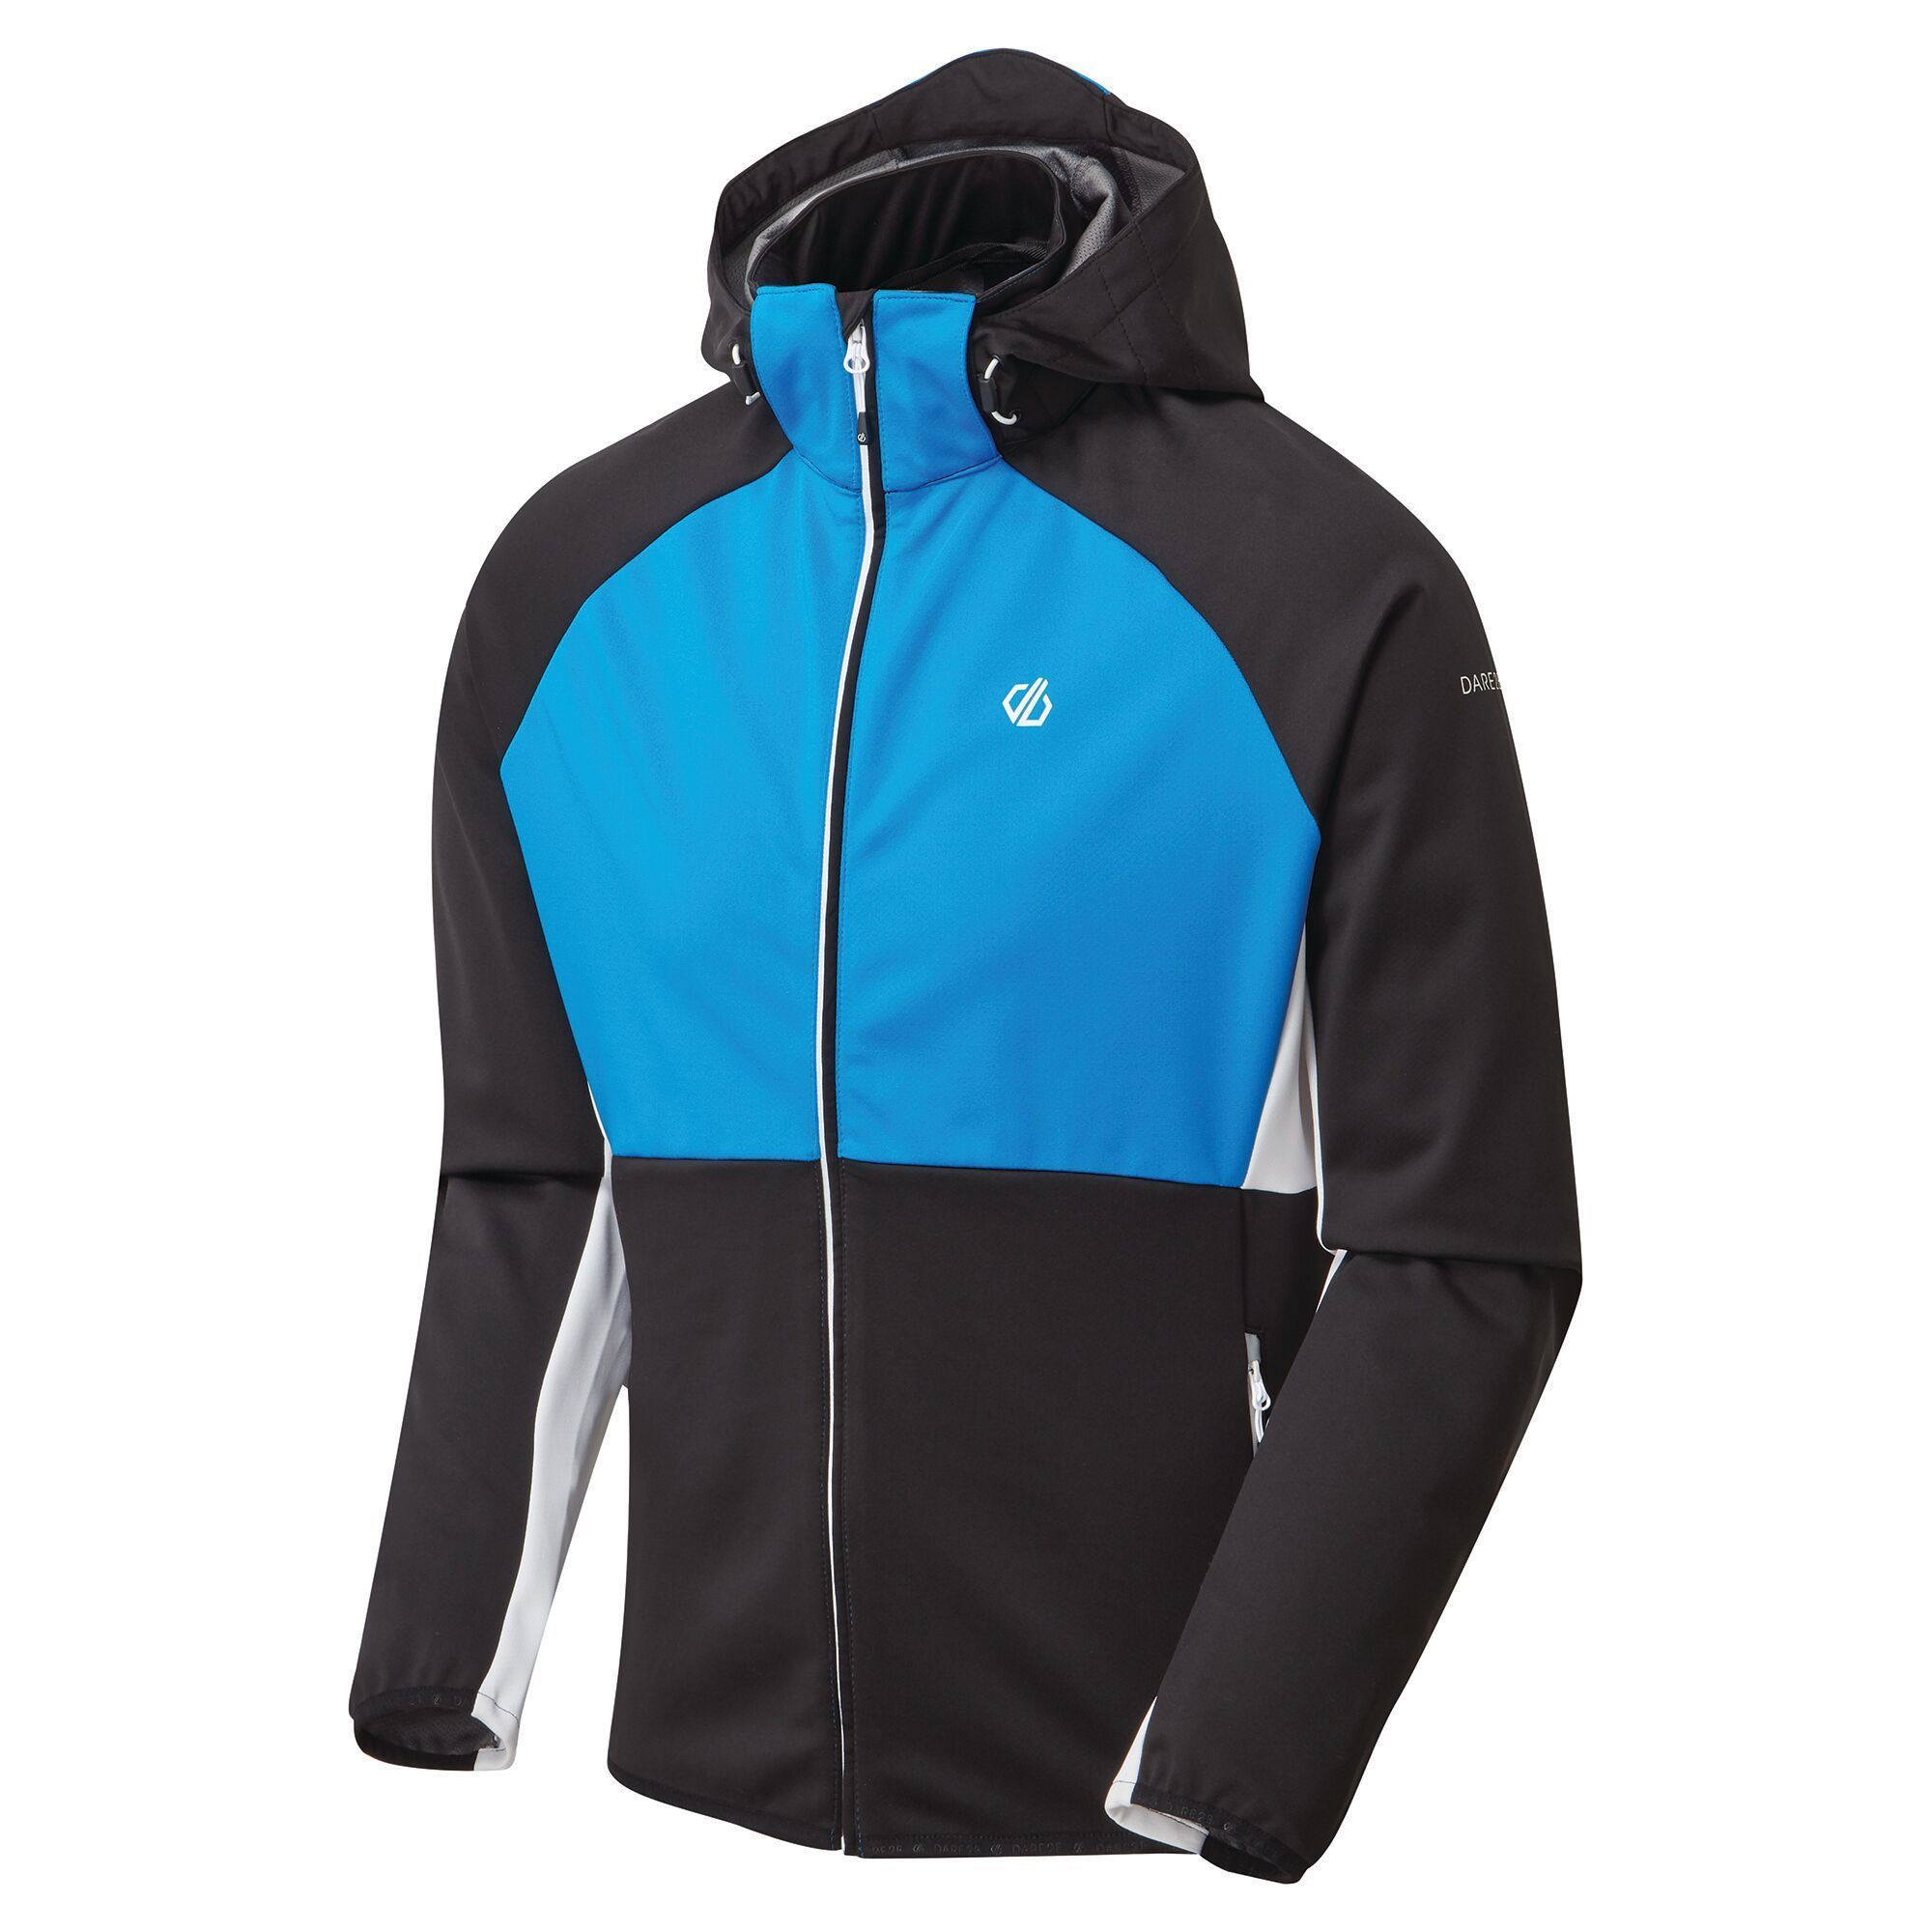 Material: polyester 95% / elastane 5%. AEP Kinematics. SeamSmart Technology. Strategically placed zones of Ilus D-lab stretch softshell to hood, chest, arms and lower back panels. Water repellent finish. Detachable performance fit technical hood with adjusters. Stretch binding to cuffs and hem. 2 x zipped lower pockets.